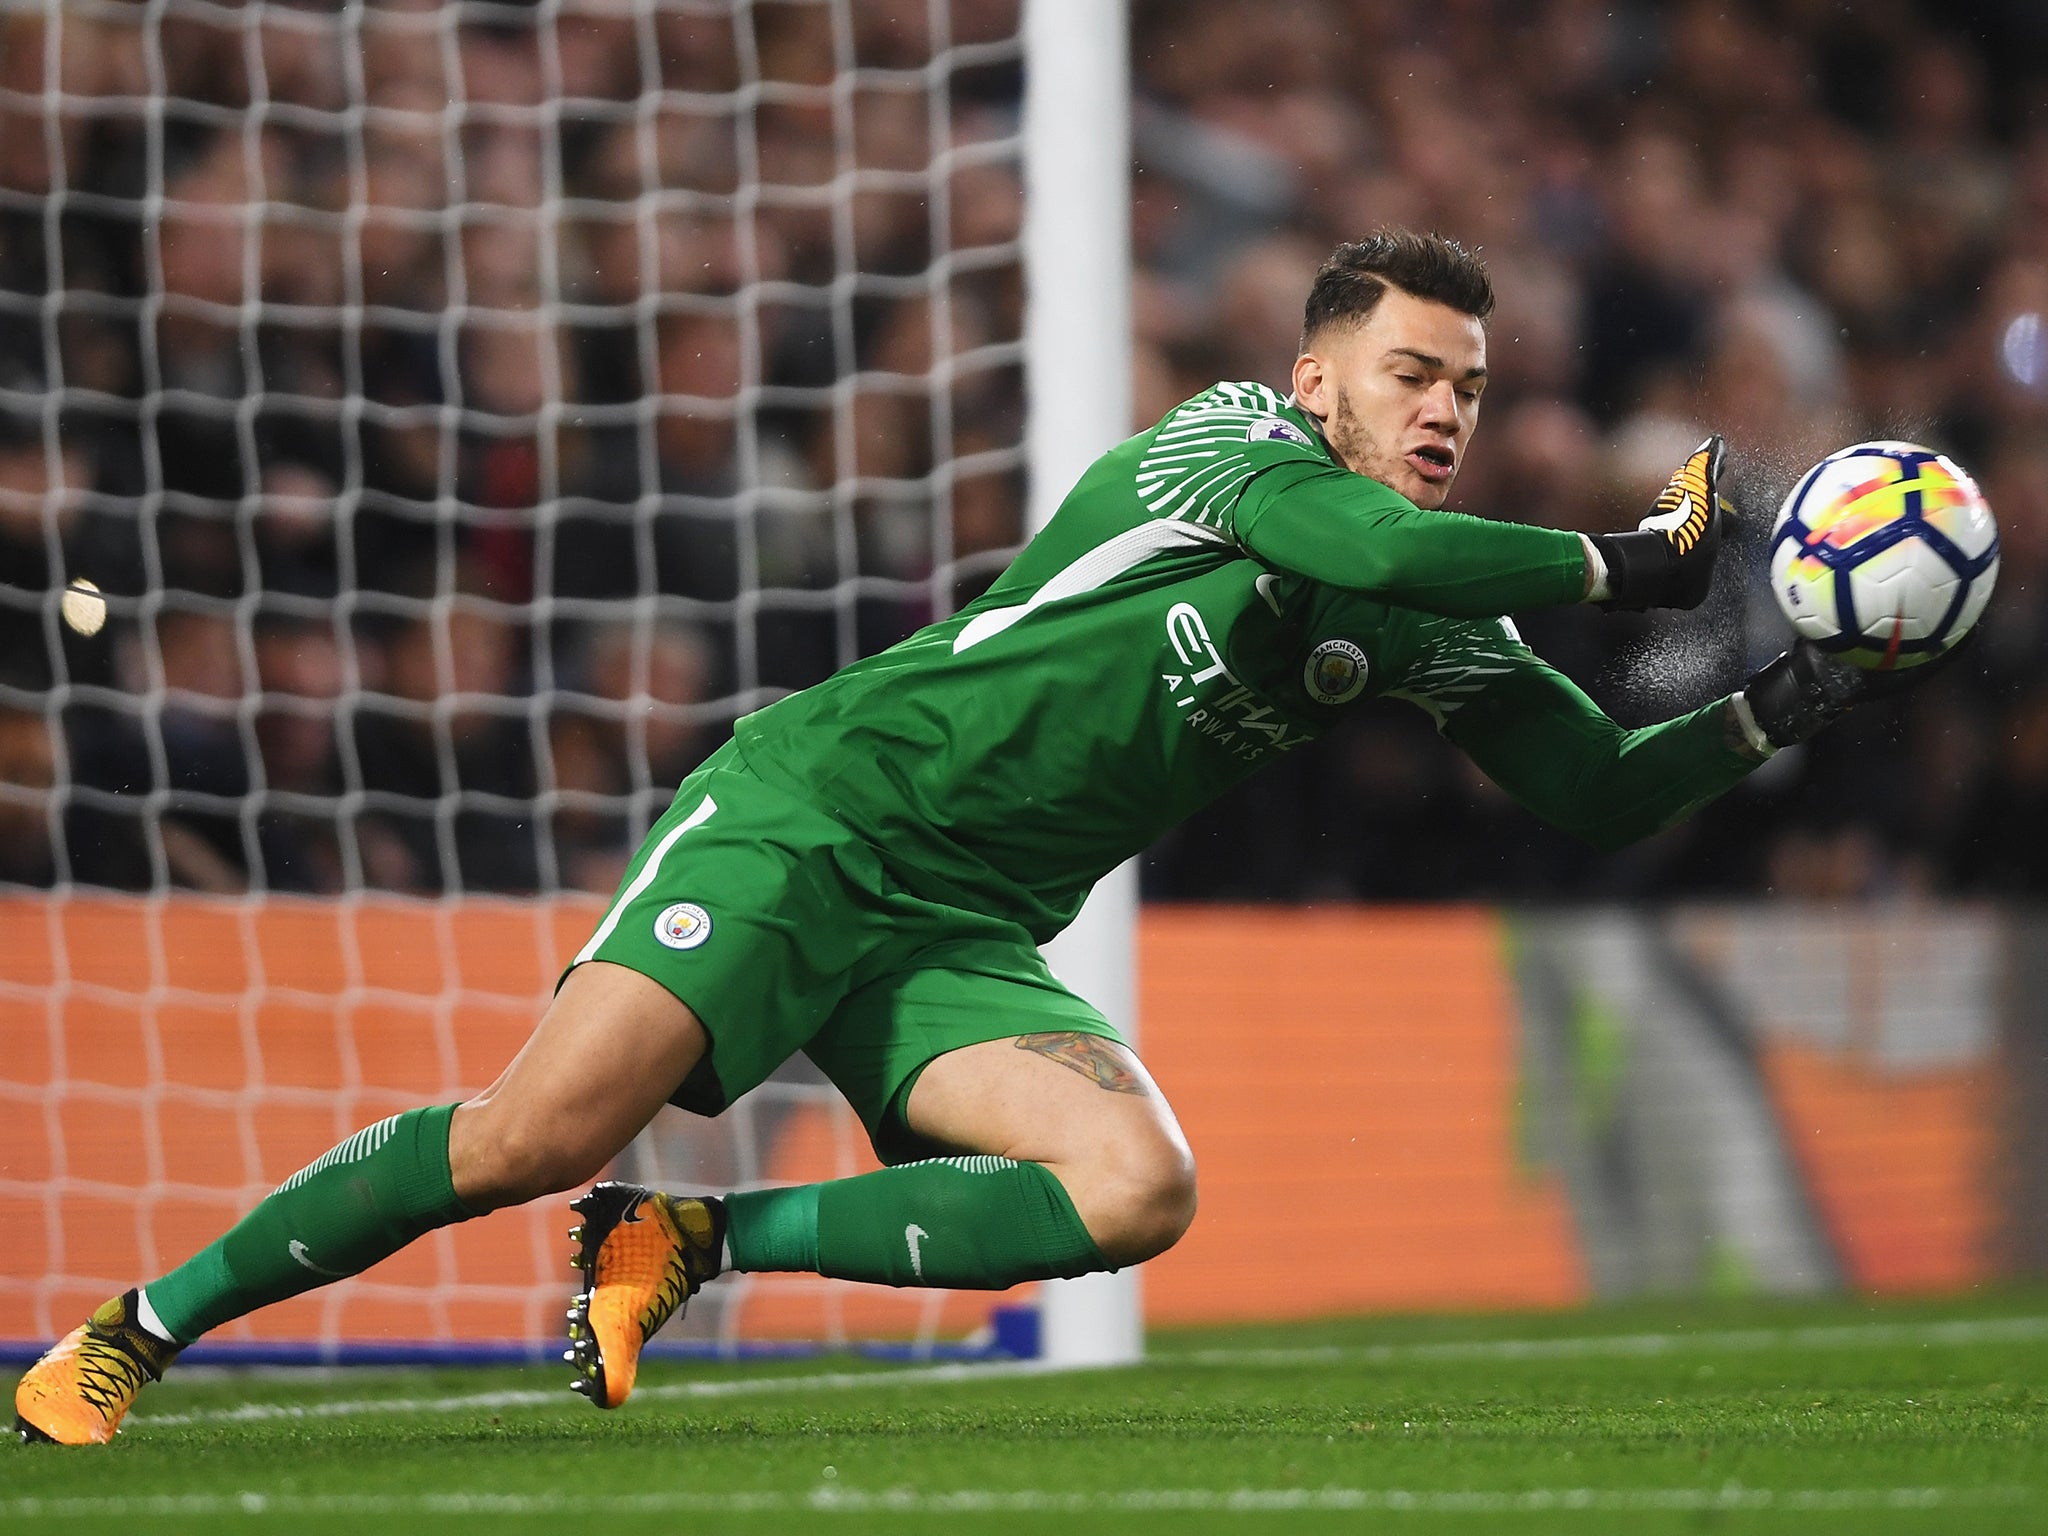 Ederson has proven to be one of Pep Guardiola's best summer signings for Manchester City